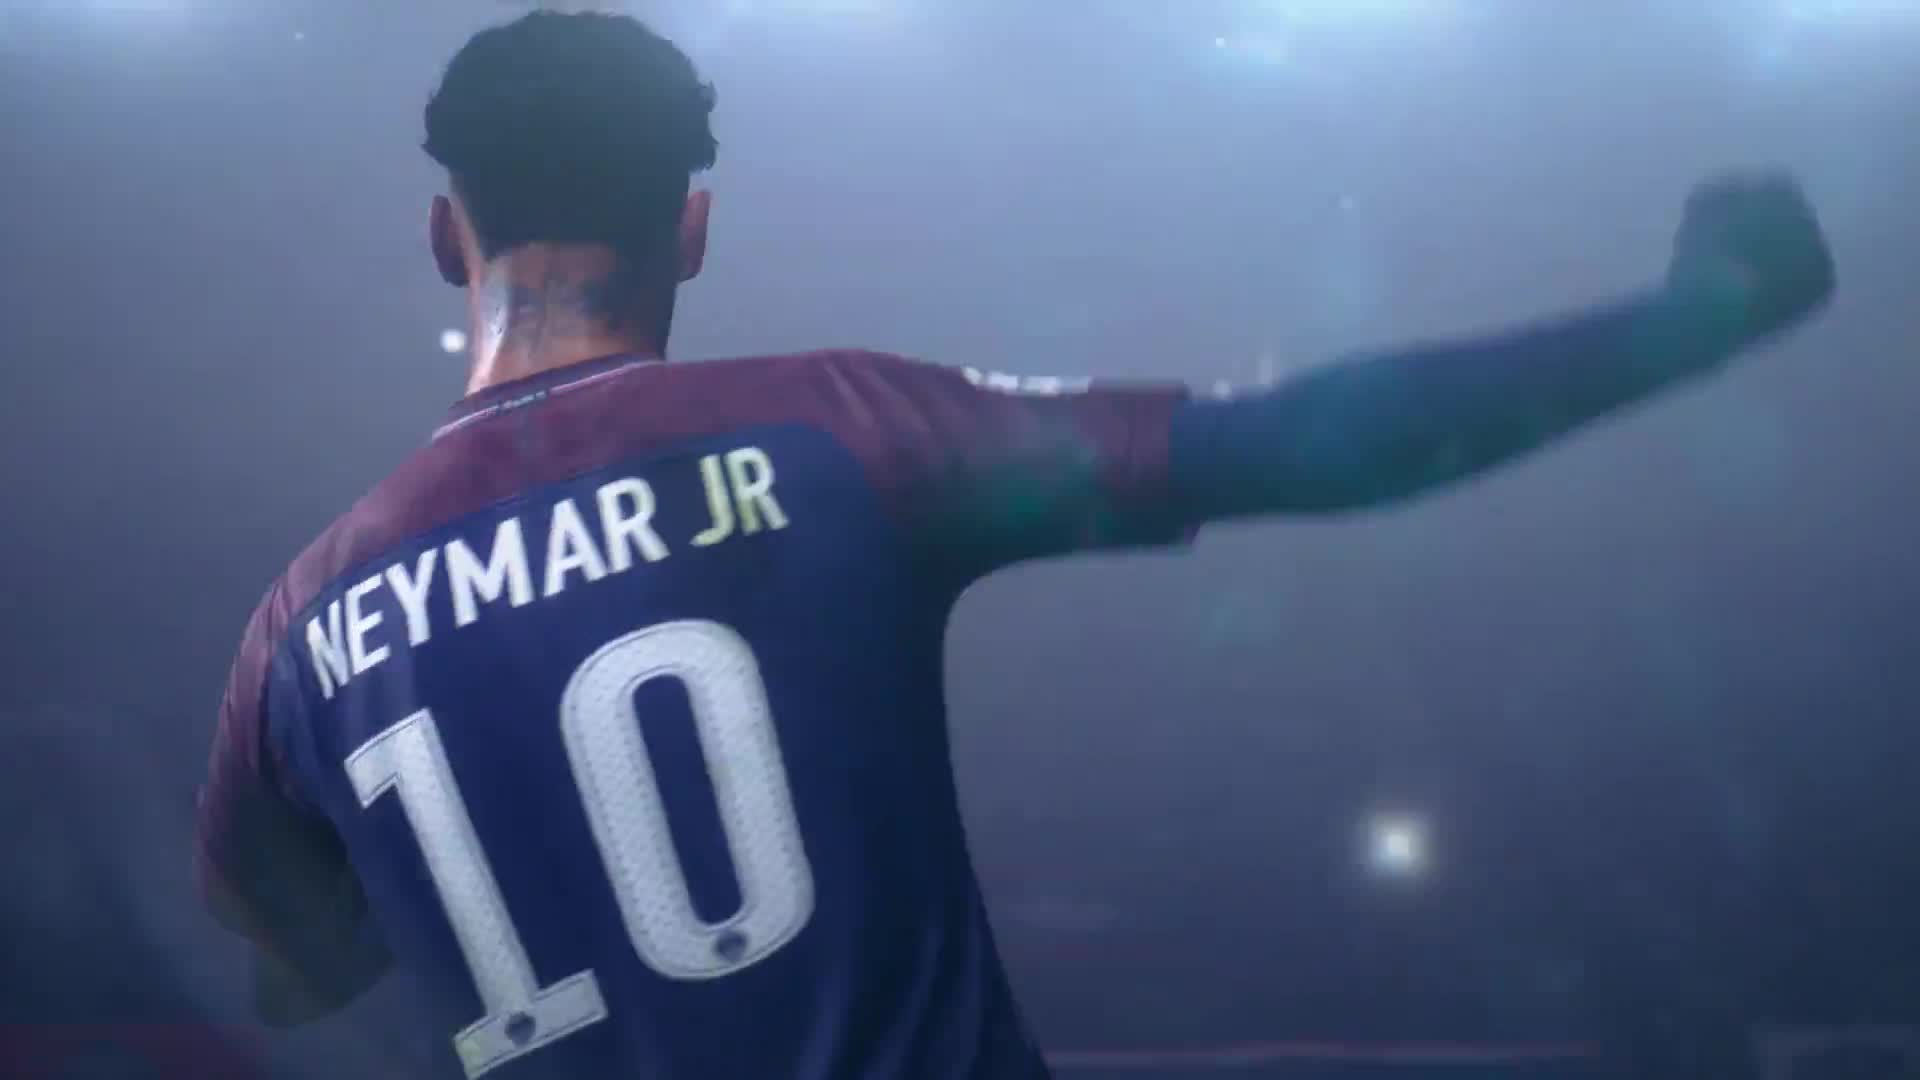 FIFA 19  Official Reveal Trailer with UEFA Champions League 